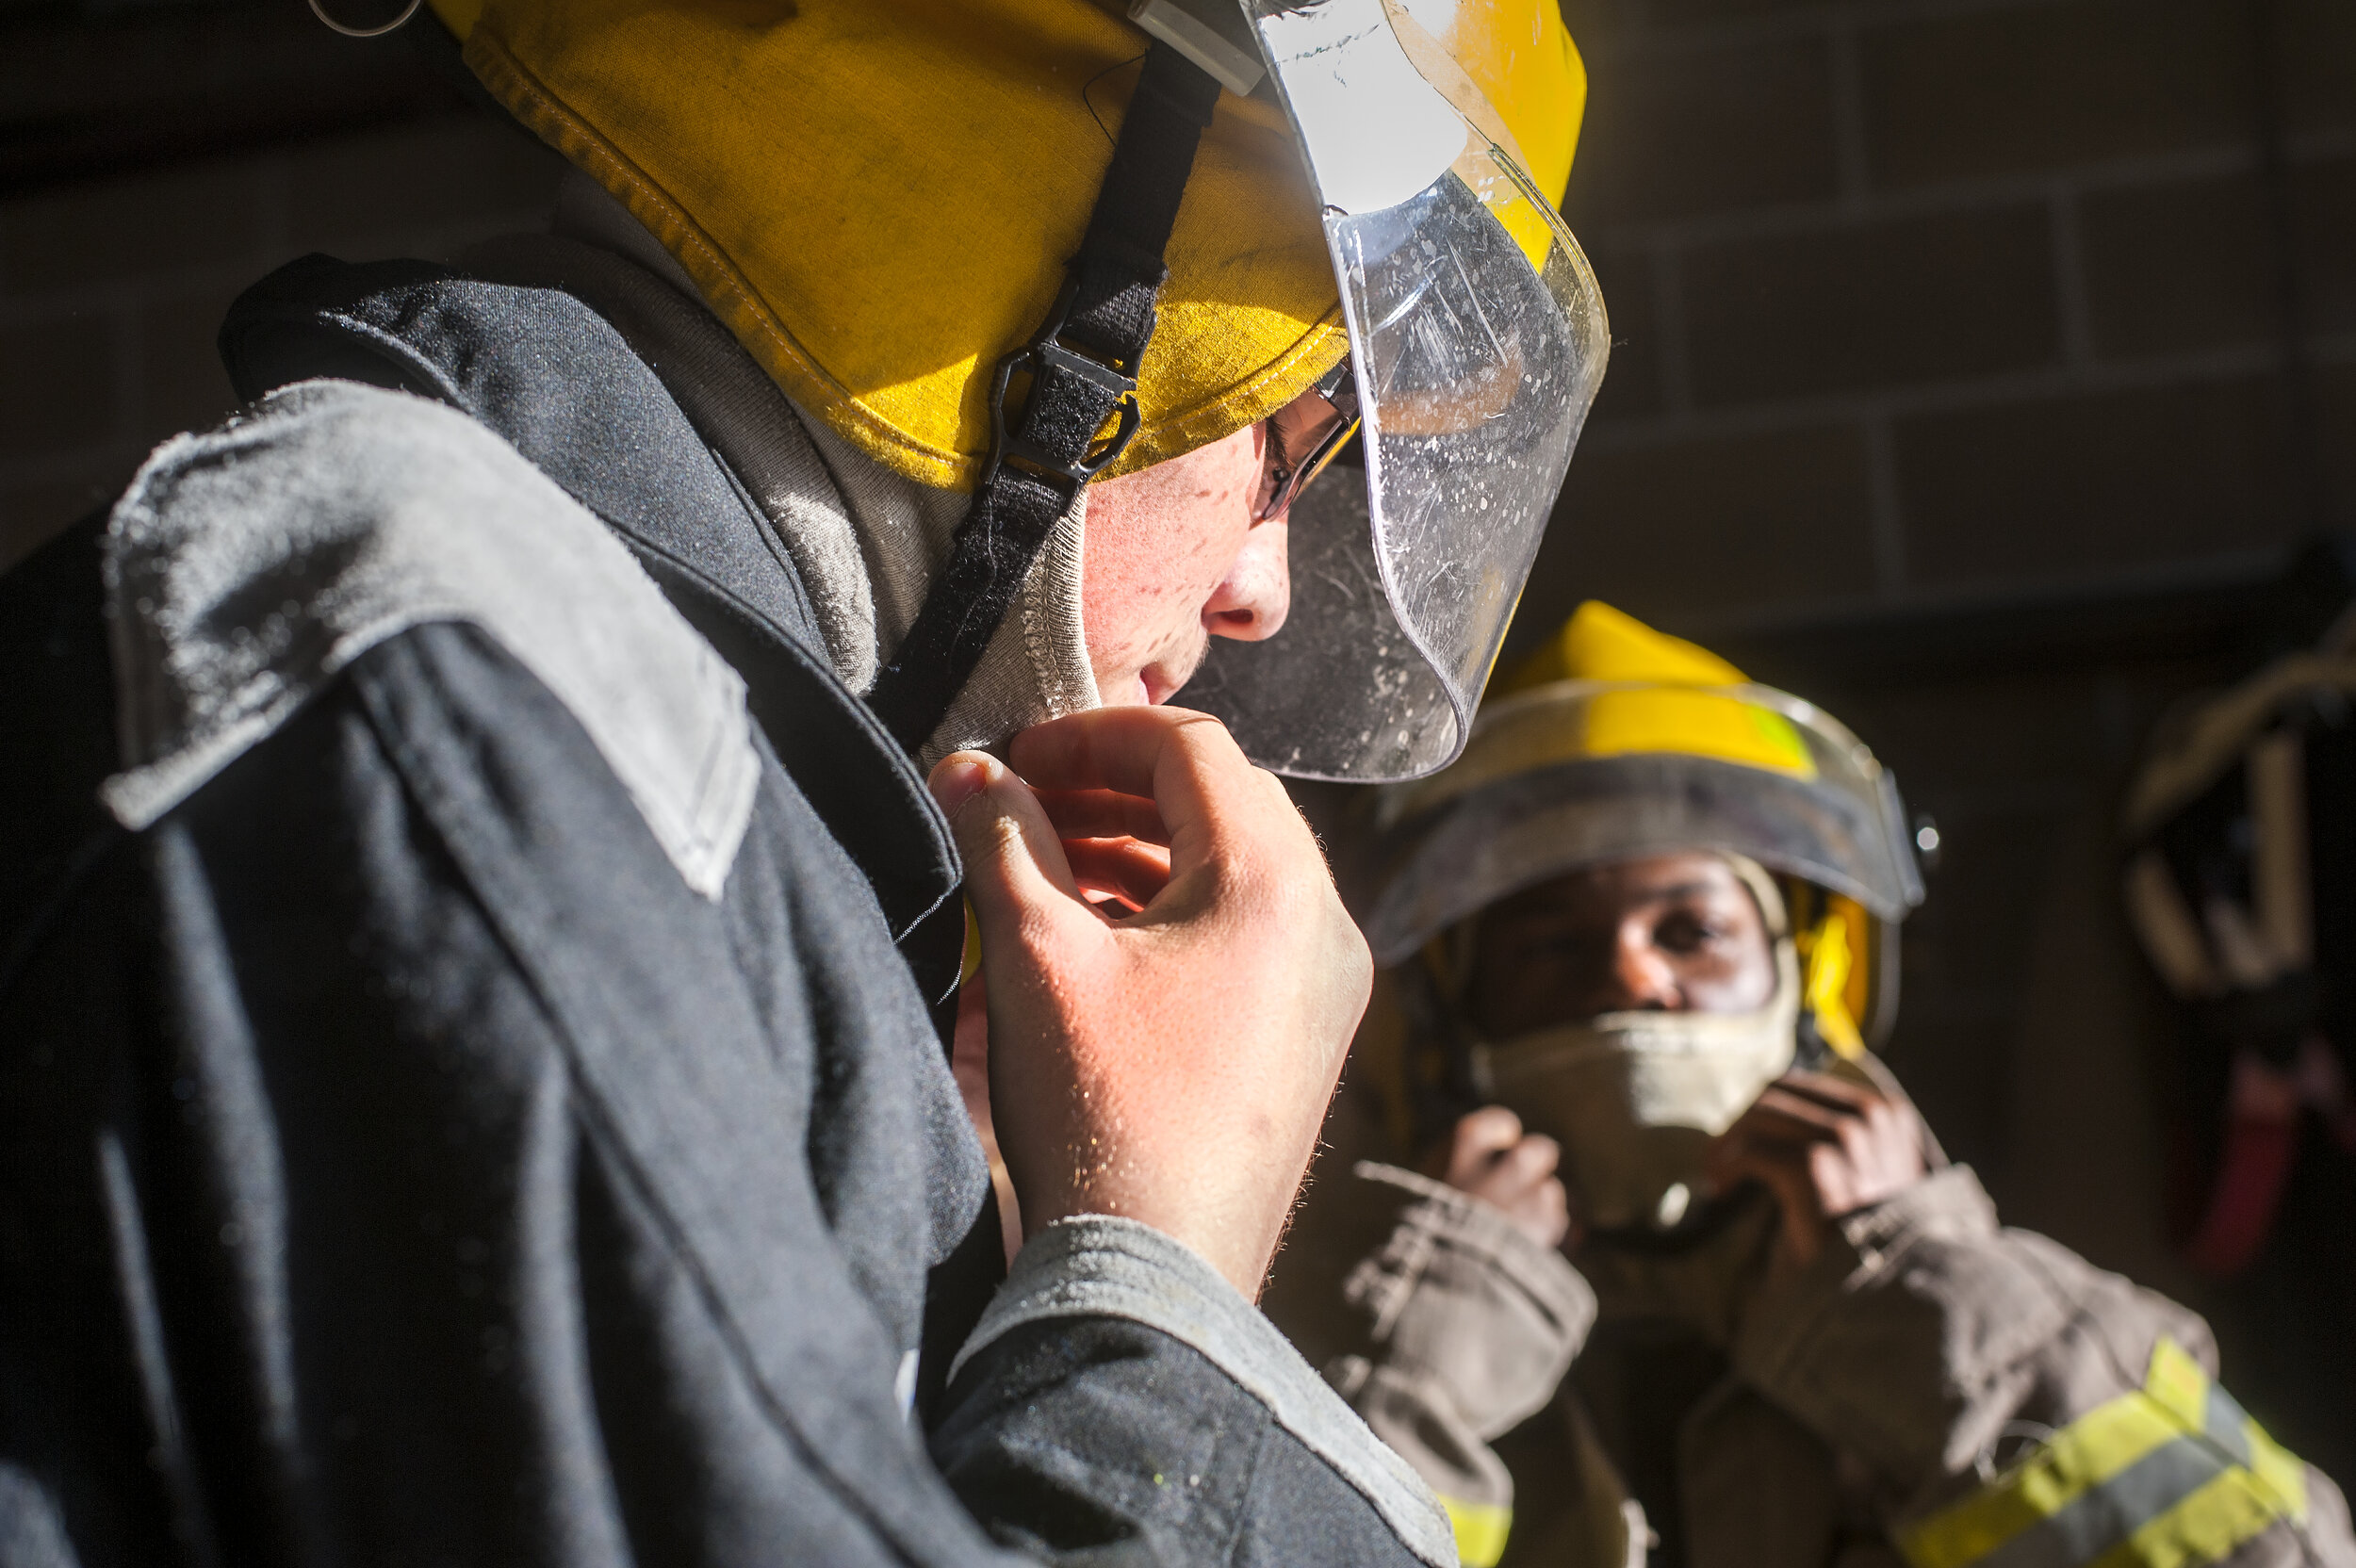  Richwoods High School student JJ Williams, left, and Peoria High School student Keelan Bailey put on firefighter gear during their hands-on training Sunday, Oct. 9, 2016, at the Peoria Fire Training Academy, 7130 N. Galena Road. 